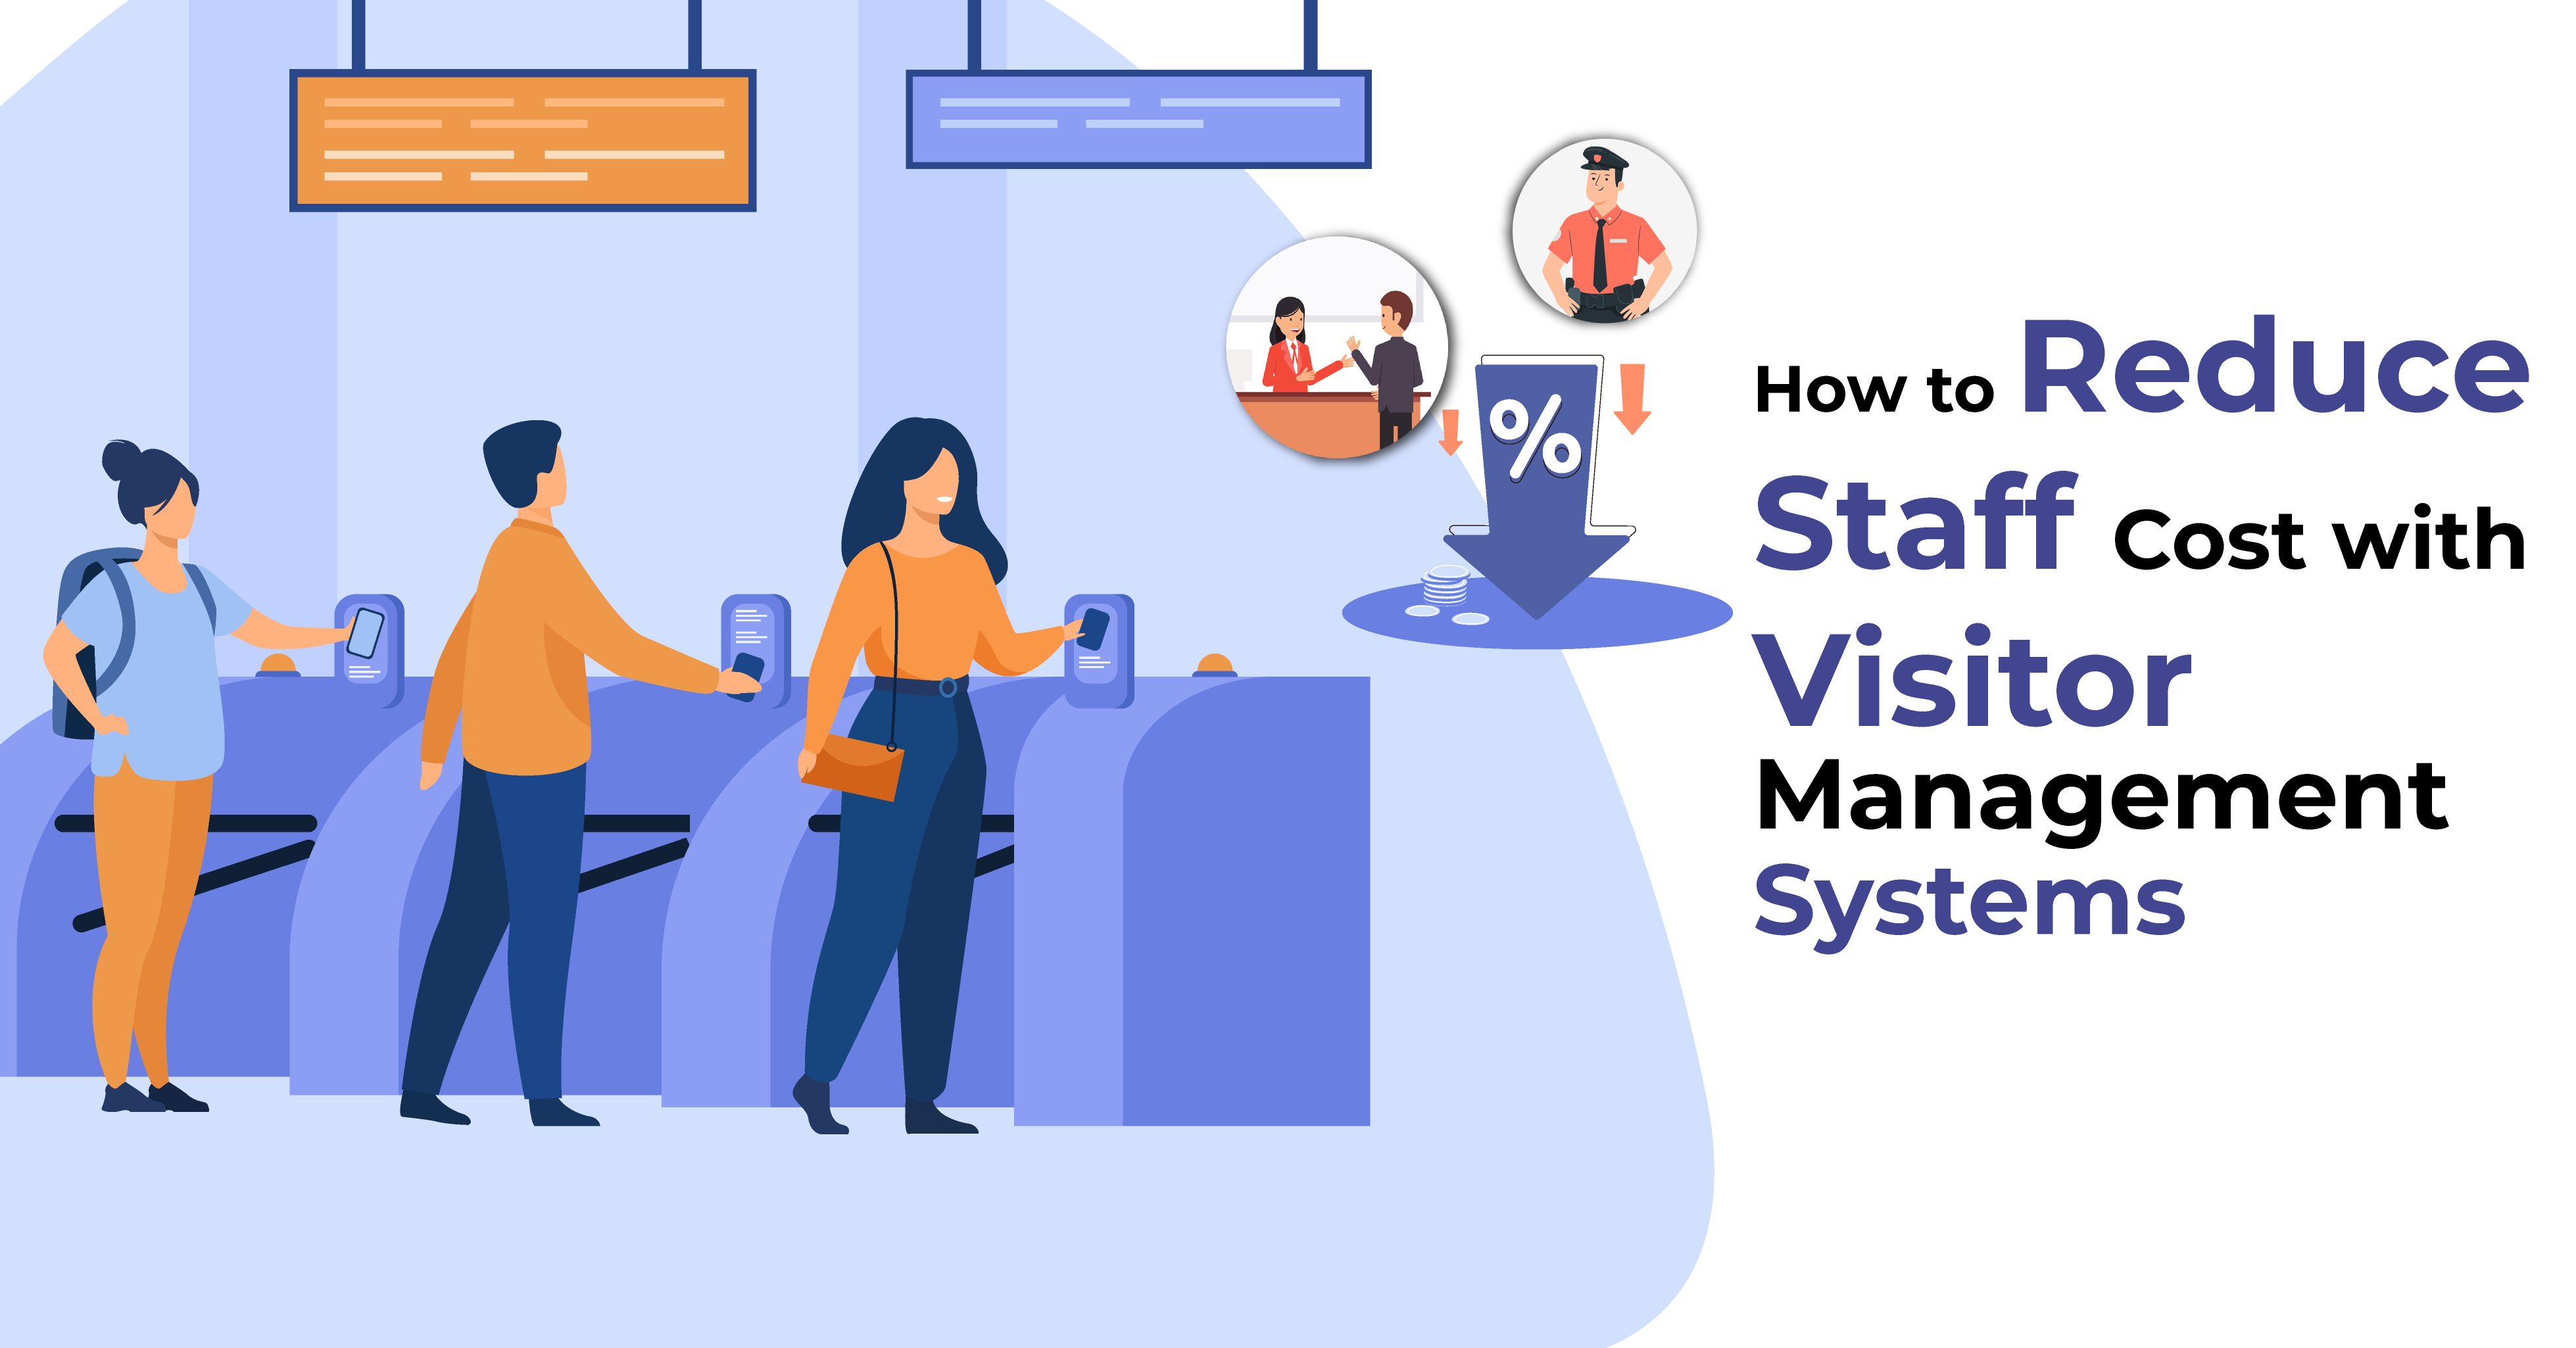 How to Reduce Staff Cost with Visitor Management Systems